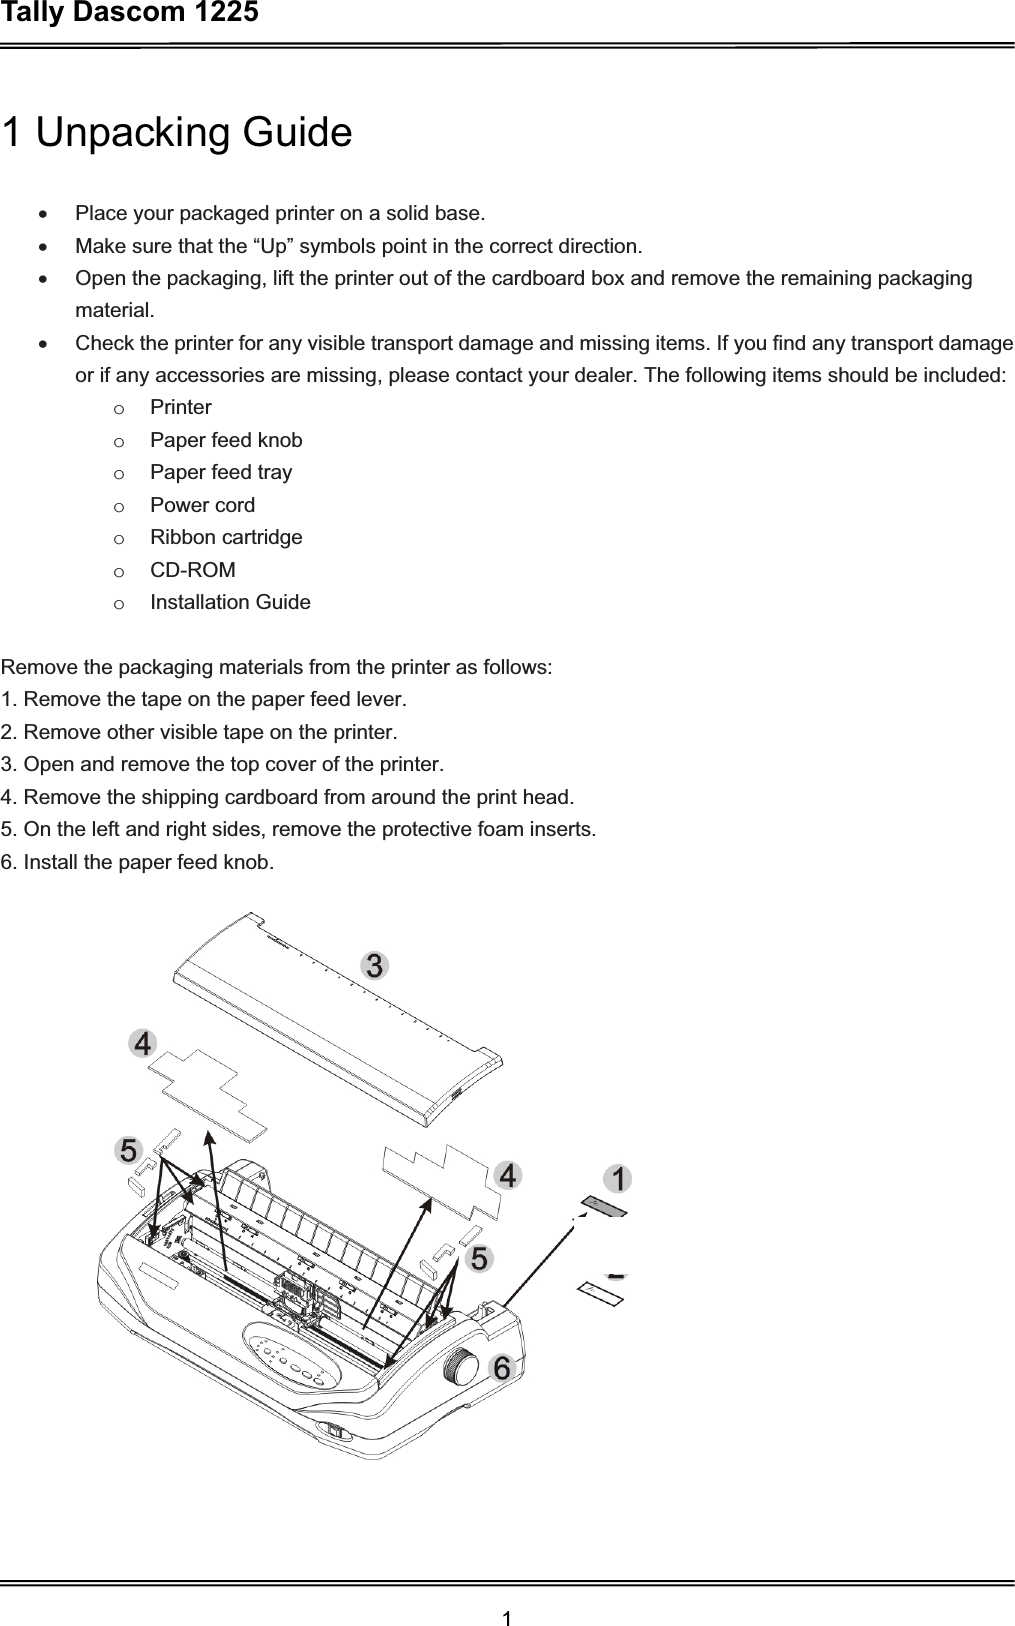 Tally Dascom 1225 11 Unpacking Guide x  Place your packaged printer on a solid base. x  Make sure that the “Up” symbols point in the correct direction. x  Open the packaging, lift the printer out of the cardboard box and remove the remaining packaging material.x  Check the printer for any visible transport damage and missing items. If you find any transport damage or if any accessories are missing, please contact your dealer. The following items should be included: o Printer o  Paper feed knob o  Paper feed tray o Power cord o Ribbon cartridge o CD-ROM o Installation Guide Remove the packaging materials from the printer as follows: 1. Remove the tape on the paper feed lever. 2. Remove other visible tape on the printer.   3. Open and remove the top cover of the printer. 4. Remove the shipping cardboard from around the print head. 5. On the left and right sides, remove the protective foam inserts. 6. Install the paper feed knob. 